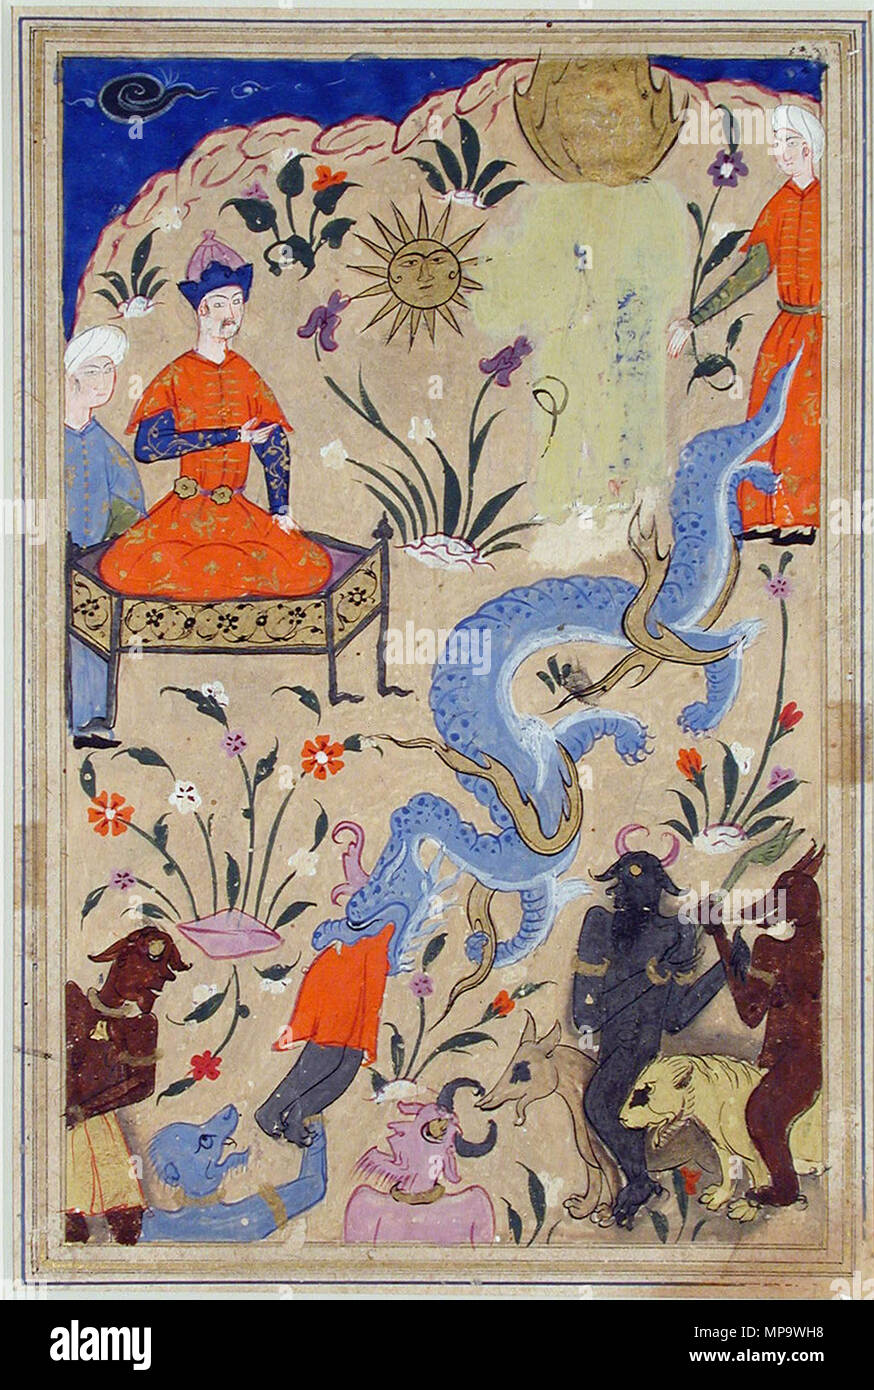 . English: Series Title: History of the Prophets Suite Name: Qisas al-Anbiya Creation Date: ca. 1540 Display Dimensions: 7 13/32 in. x 4 11/16 in. (18.8 cm x 11.9 cm) Credit Line: Edwin Binney 3rd Collection Accession Number: 1990.259 Collection: <a href='http://www.sdmart.org/art/our-collection/asian-art' rel='nofollow'>The San Diego Museum of Art</a> . 2 October 2001, 11:14:39. English: thesandiegomuseumofartcollection 981 Pharaoh watches a serpent devour a person in the presence of the Moses (6125069974) Stock Photo